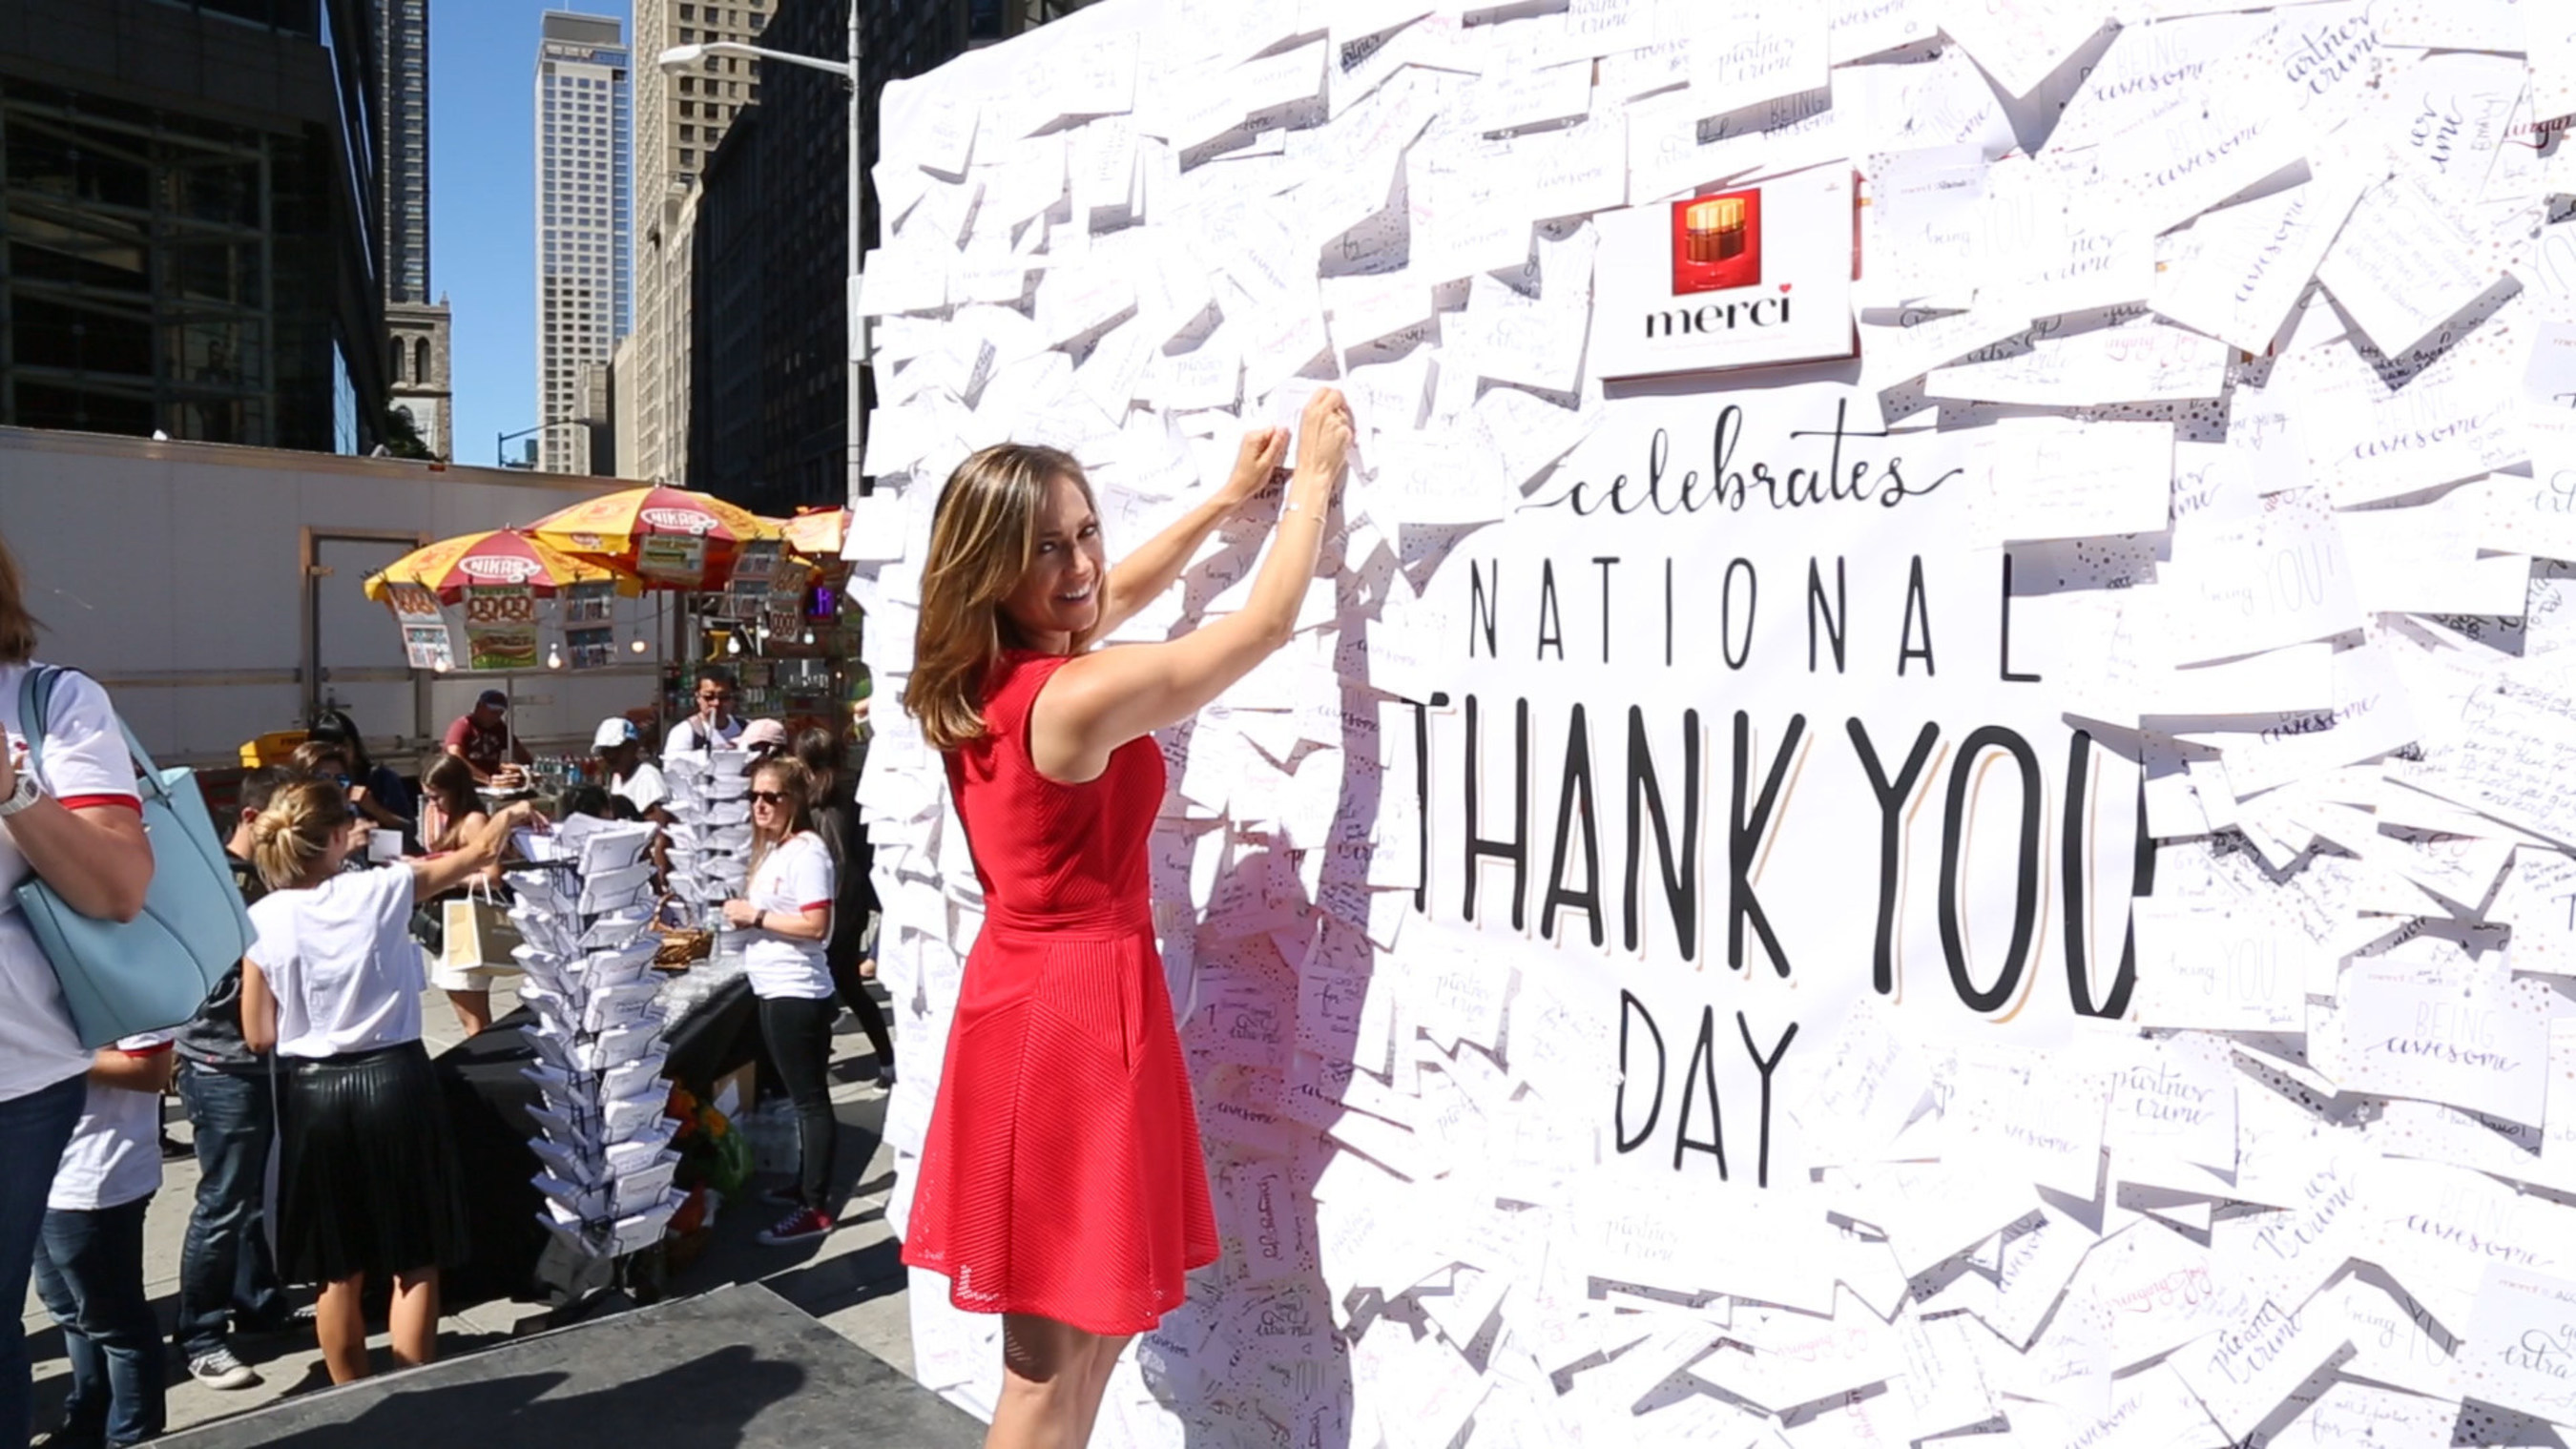 Good Morning America meteorologist and Dancing with the Stars contestant, Ginger Zee celebrated National Thank You Day with merci Chocolate in Columbus Circle, sharing a thank you note to her husband, Ben and 8-month-old son, Adrian that she posted to The merci Thank You Wall.